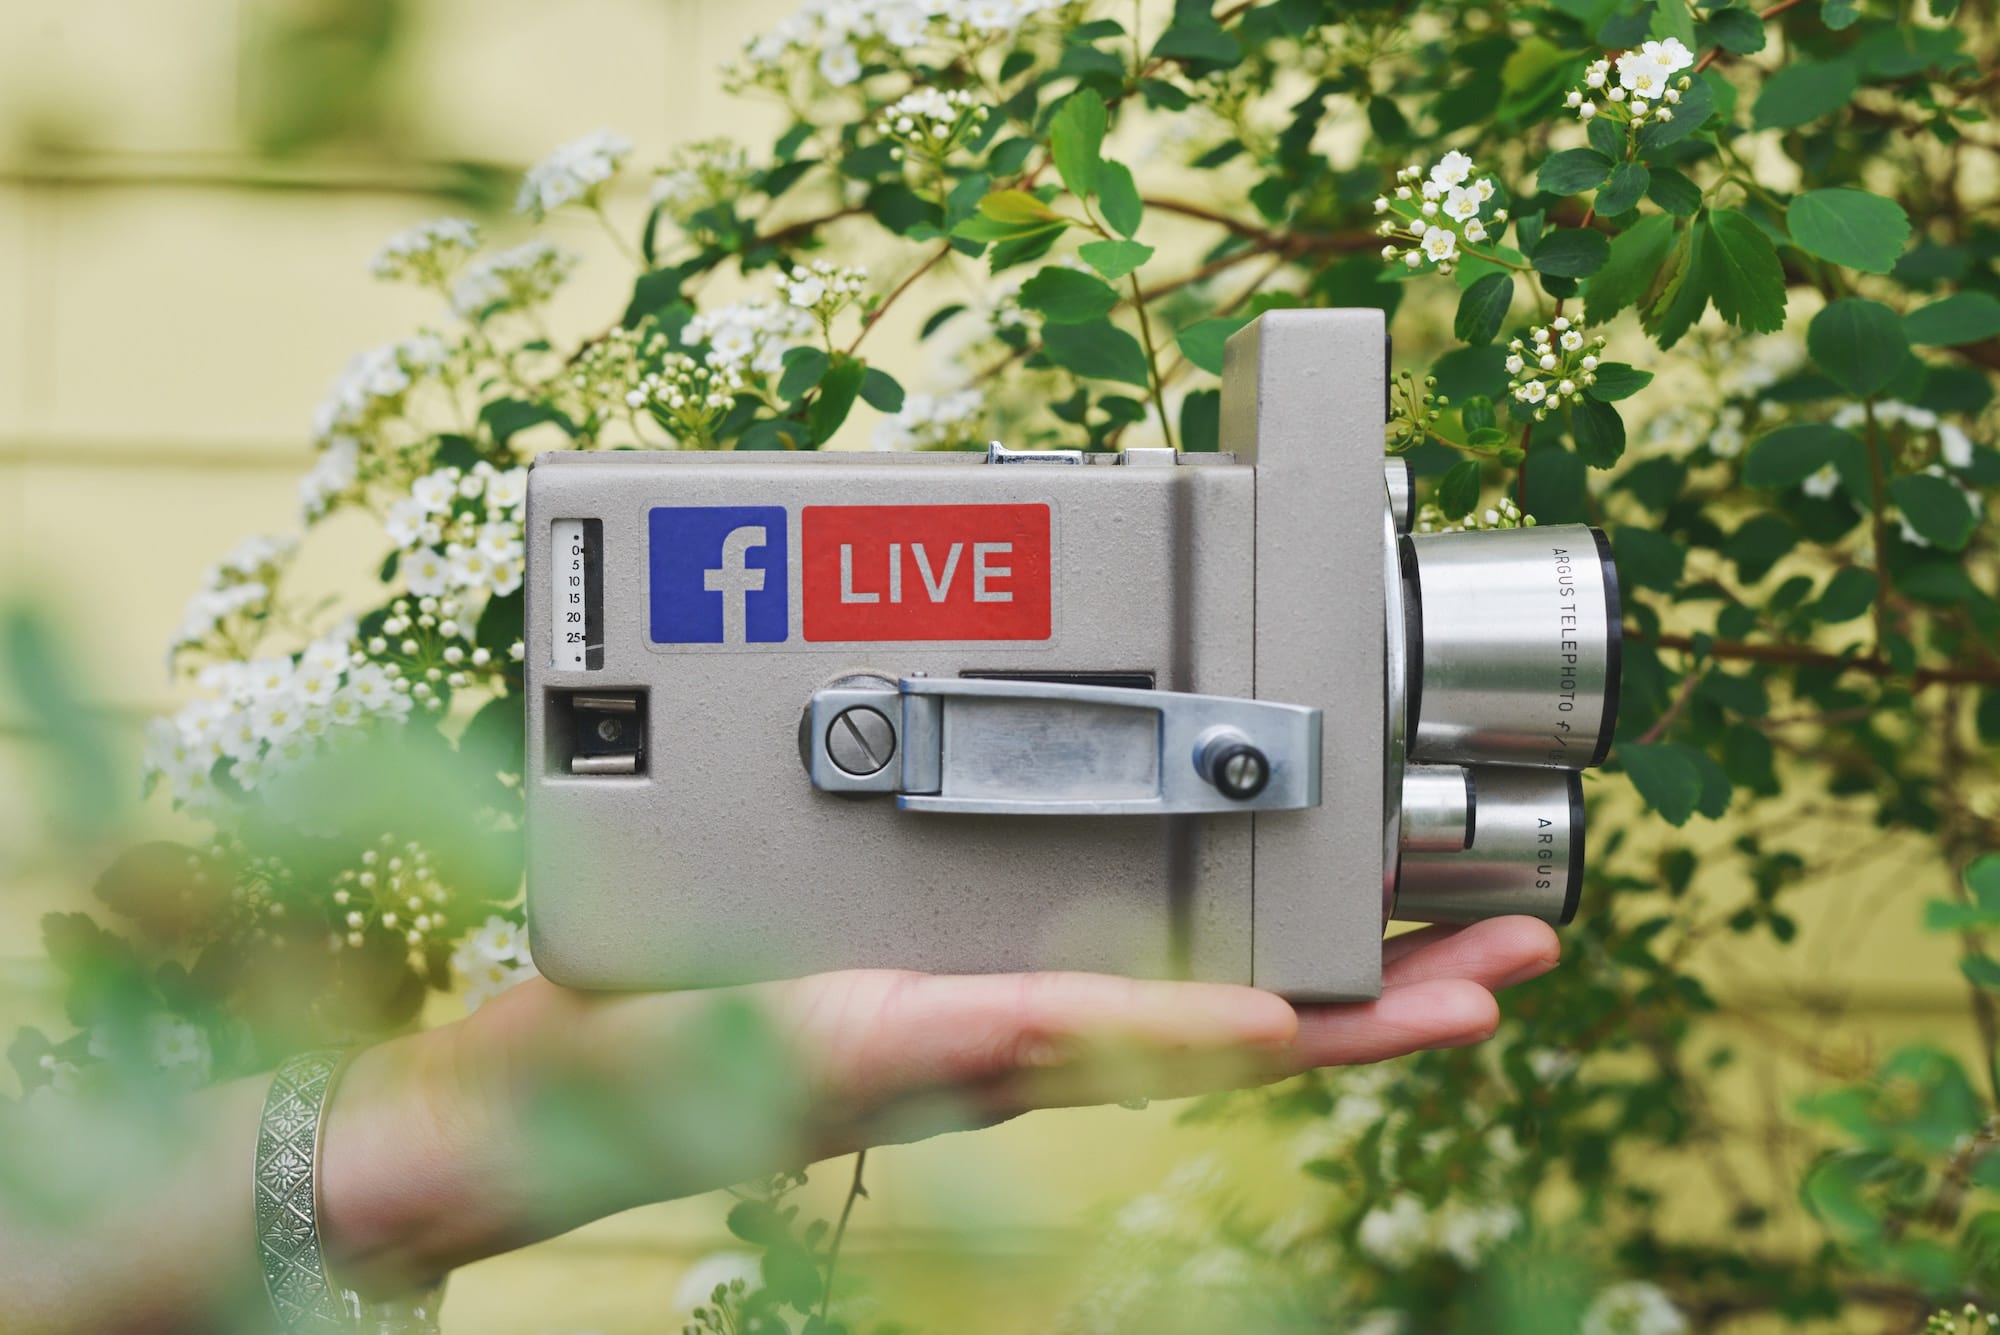 Know when to livestream on social media.